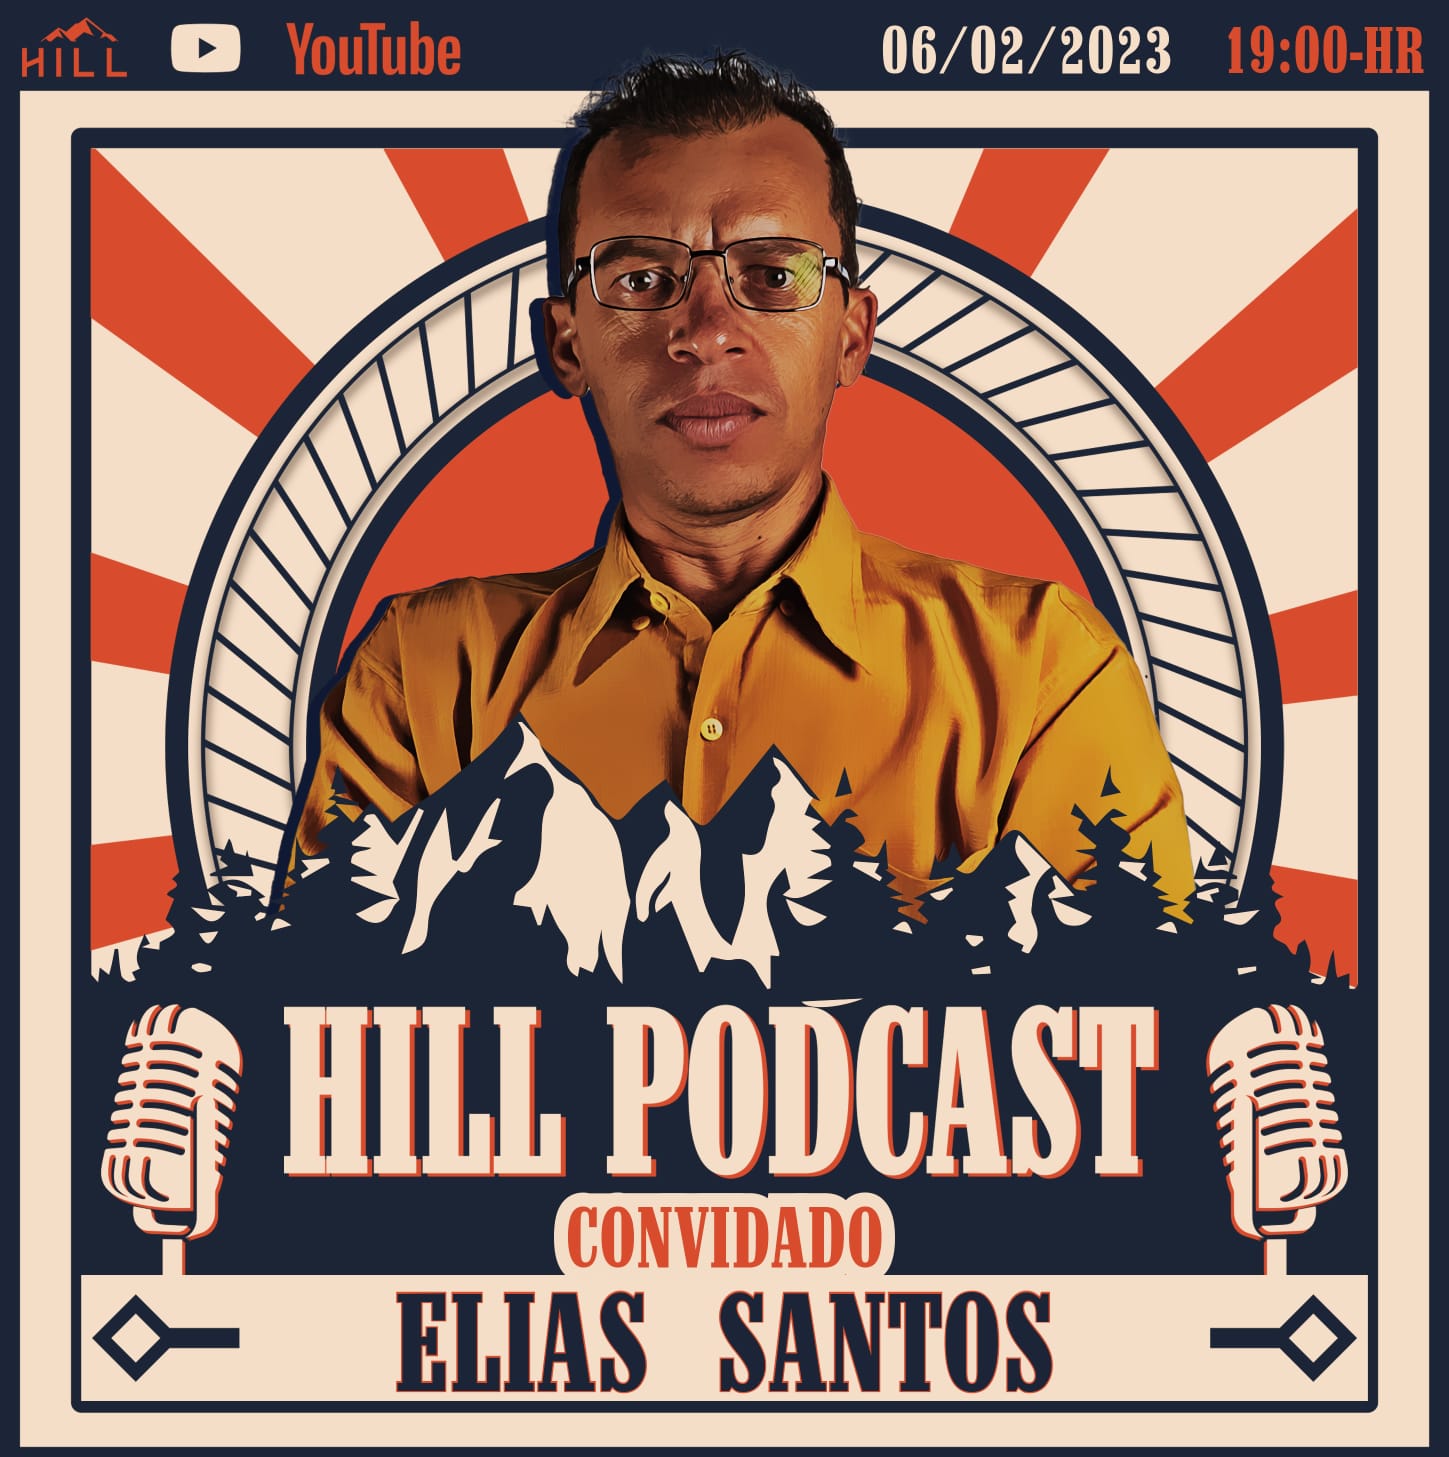 HiLL PODCAST